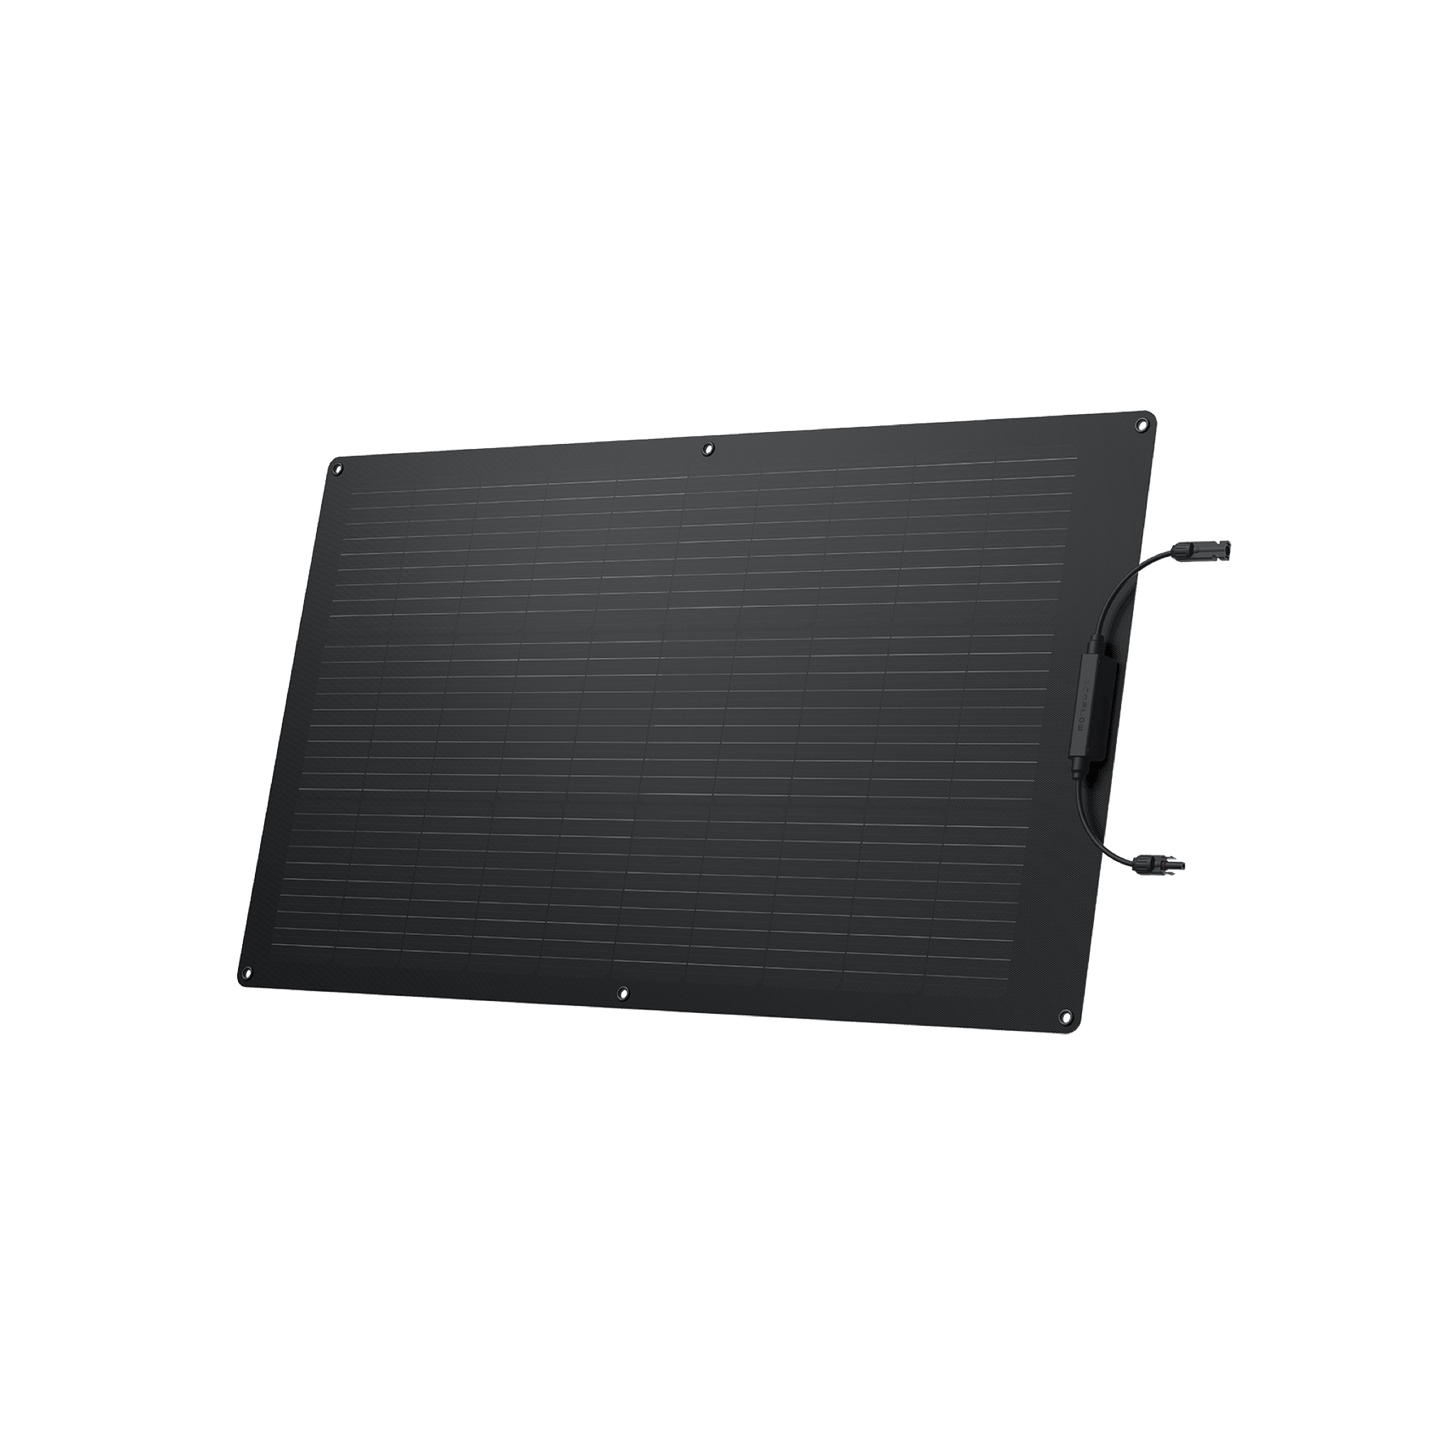 EcoFlow 100W Flexible Solar Panel - Waterproof, Ideal for Off-Grid Solar Panel Kits, PV Charging, Power Kits & Ecosystem